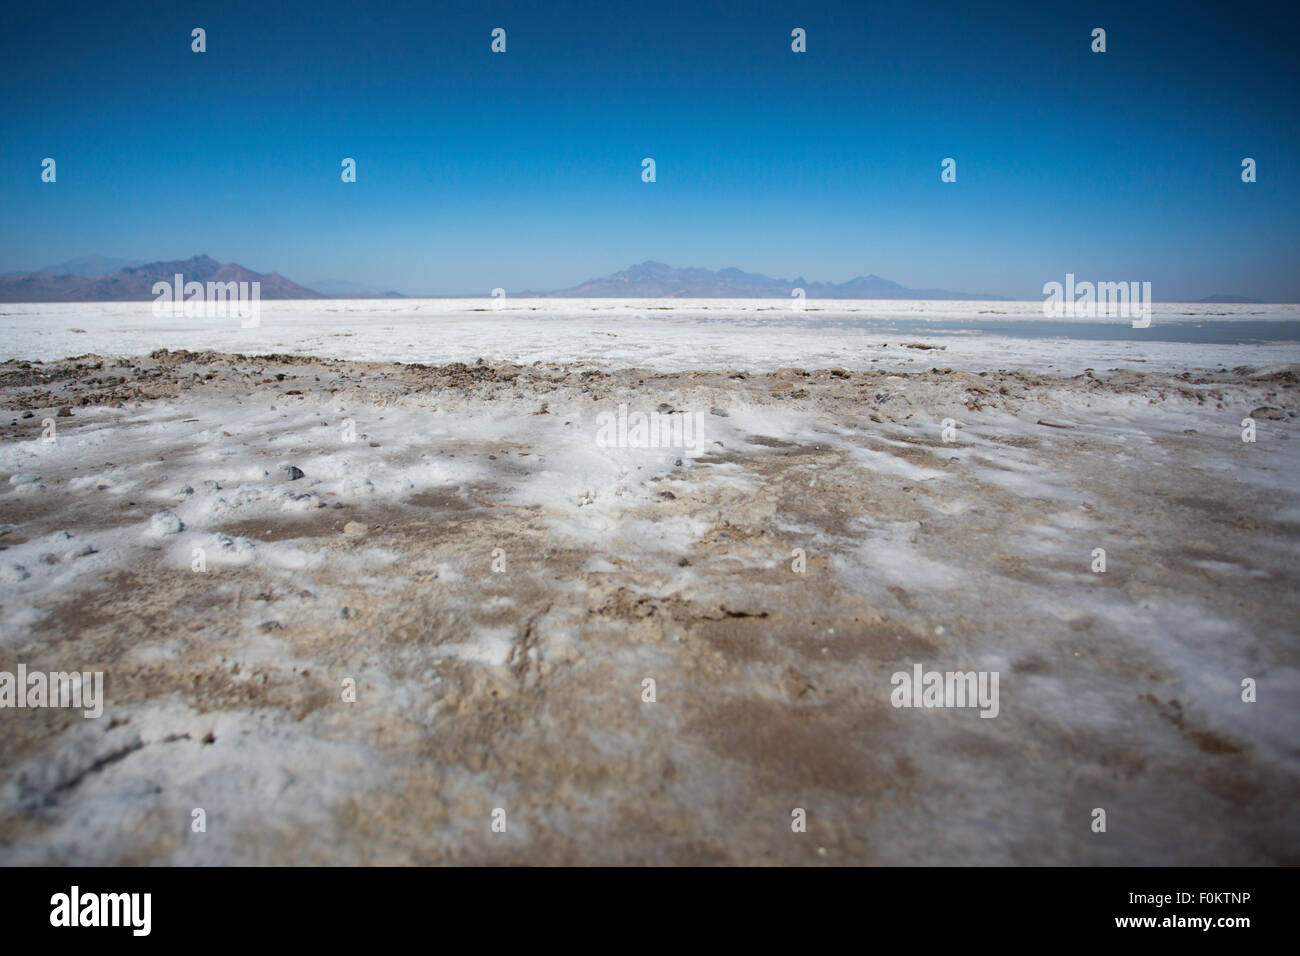 World famous Bonneville Salt Flats outside Salt Lake City Utah with mountains and blue skies. Detail of the salt on the ground Stock Photo